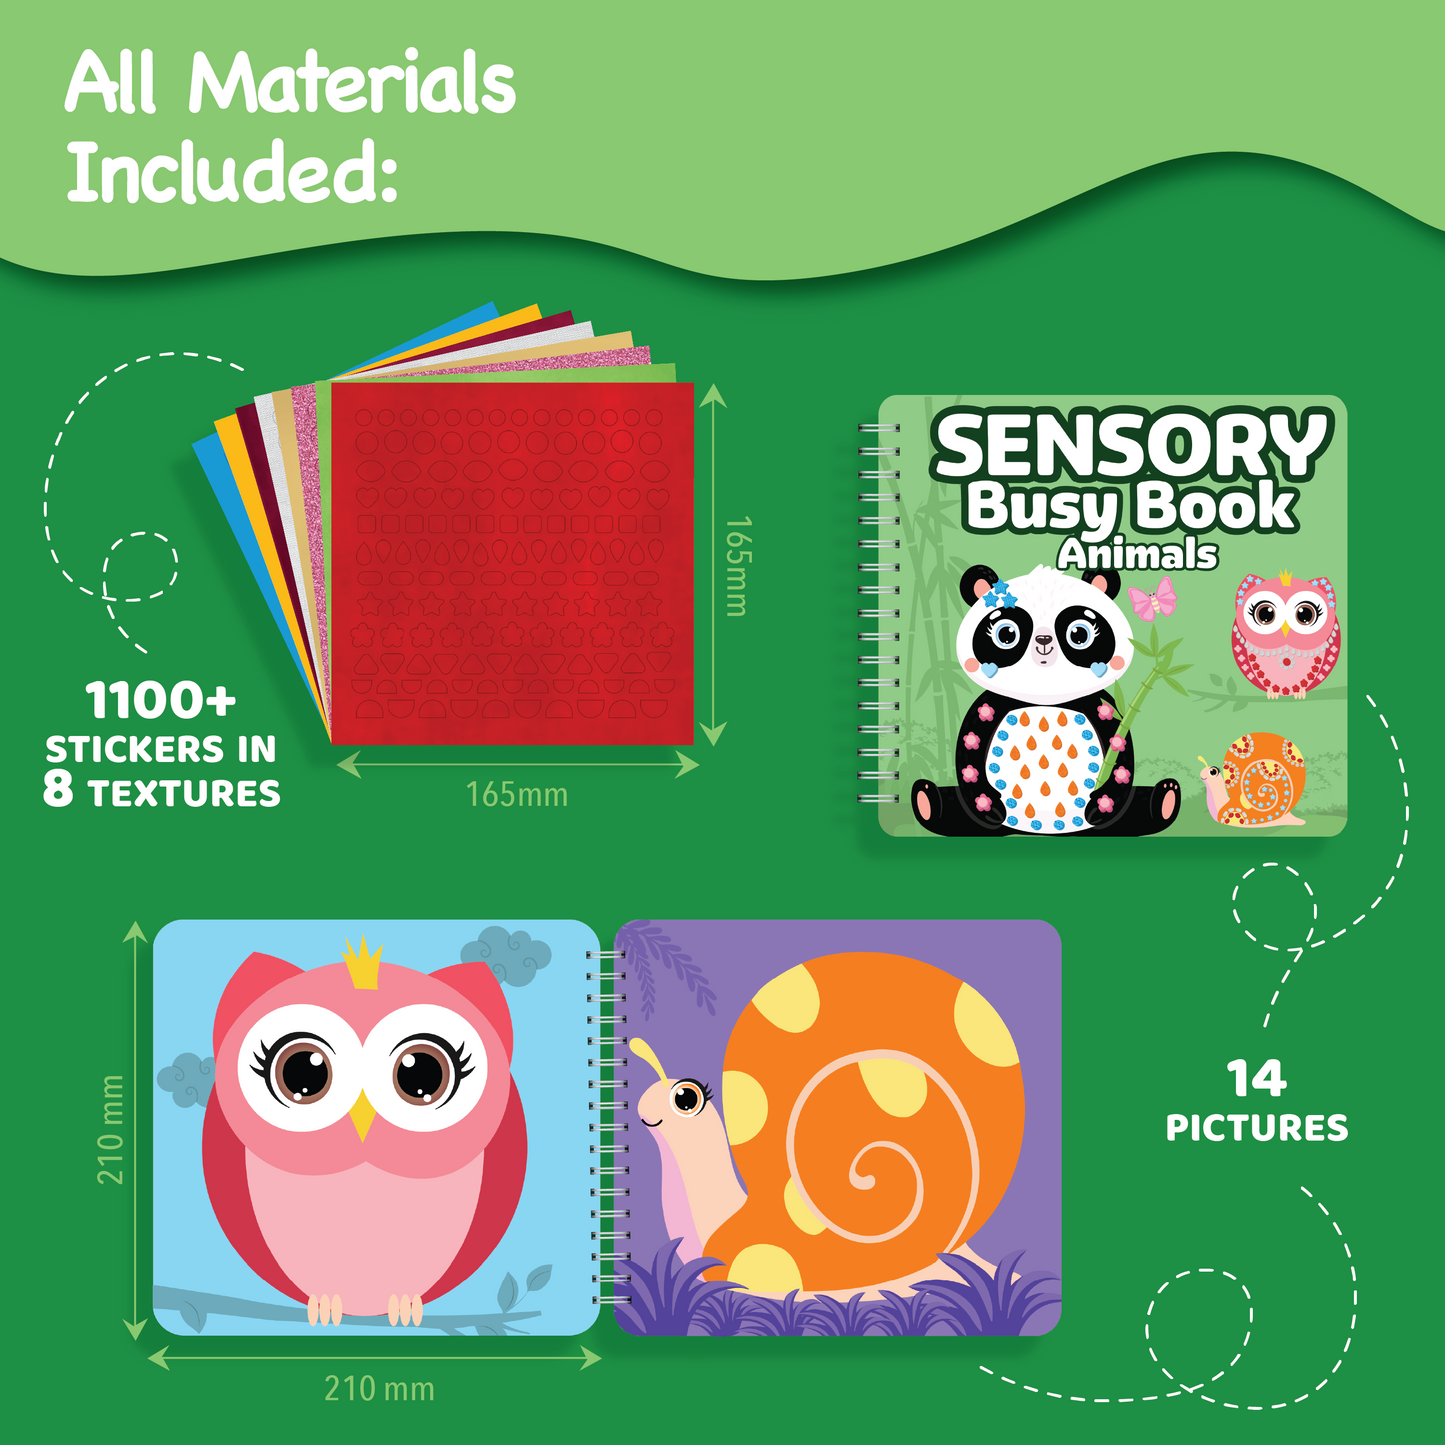 Sensory Busy Book Craft Activity with Textured Stickers - Animals, No Mess Sticker Craft for Kids, Craft Kits, Sensory DIY Activity, Gifts for Boys & Girls Ages 3,4,5,6, Travel Toys